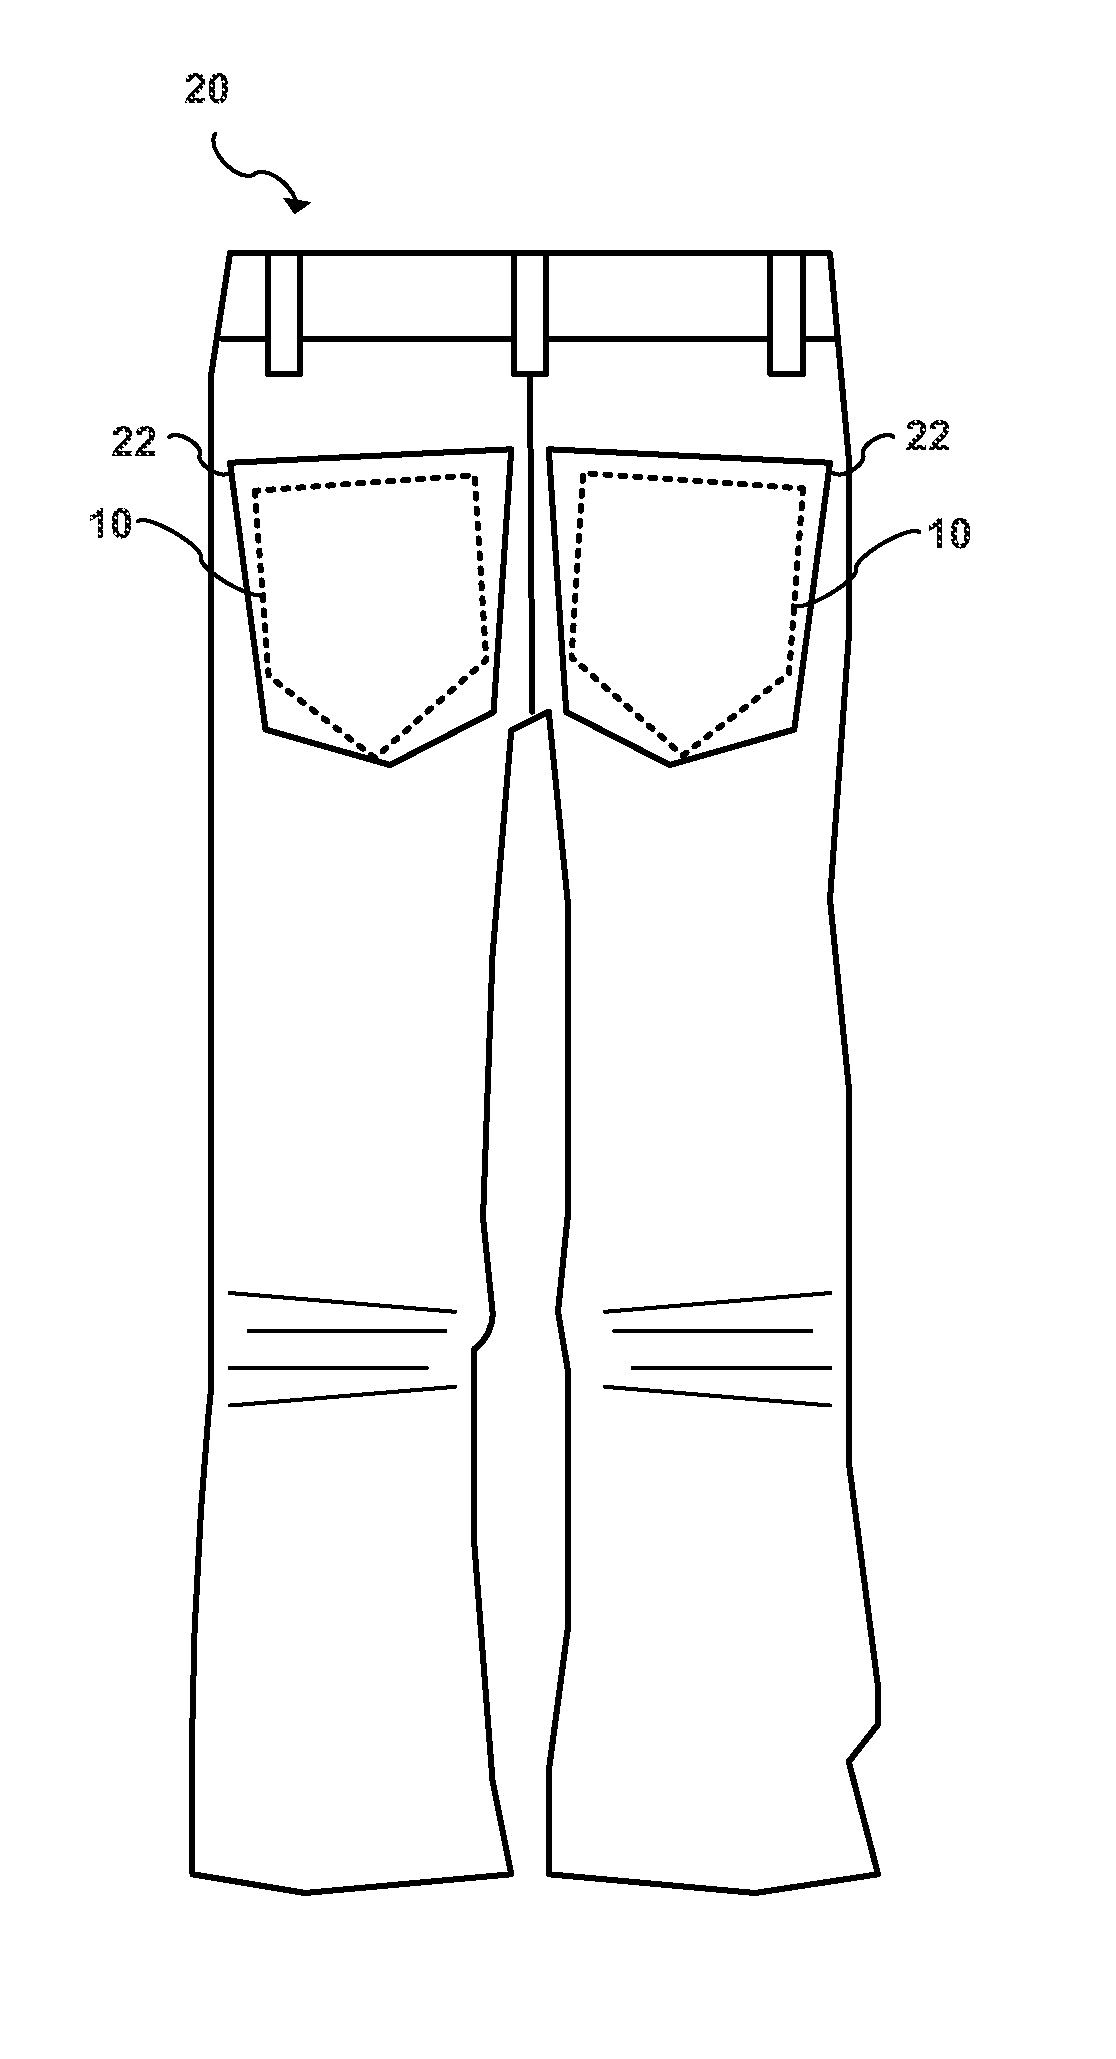 System and method for an improved appearance of a pair of pants